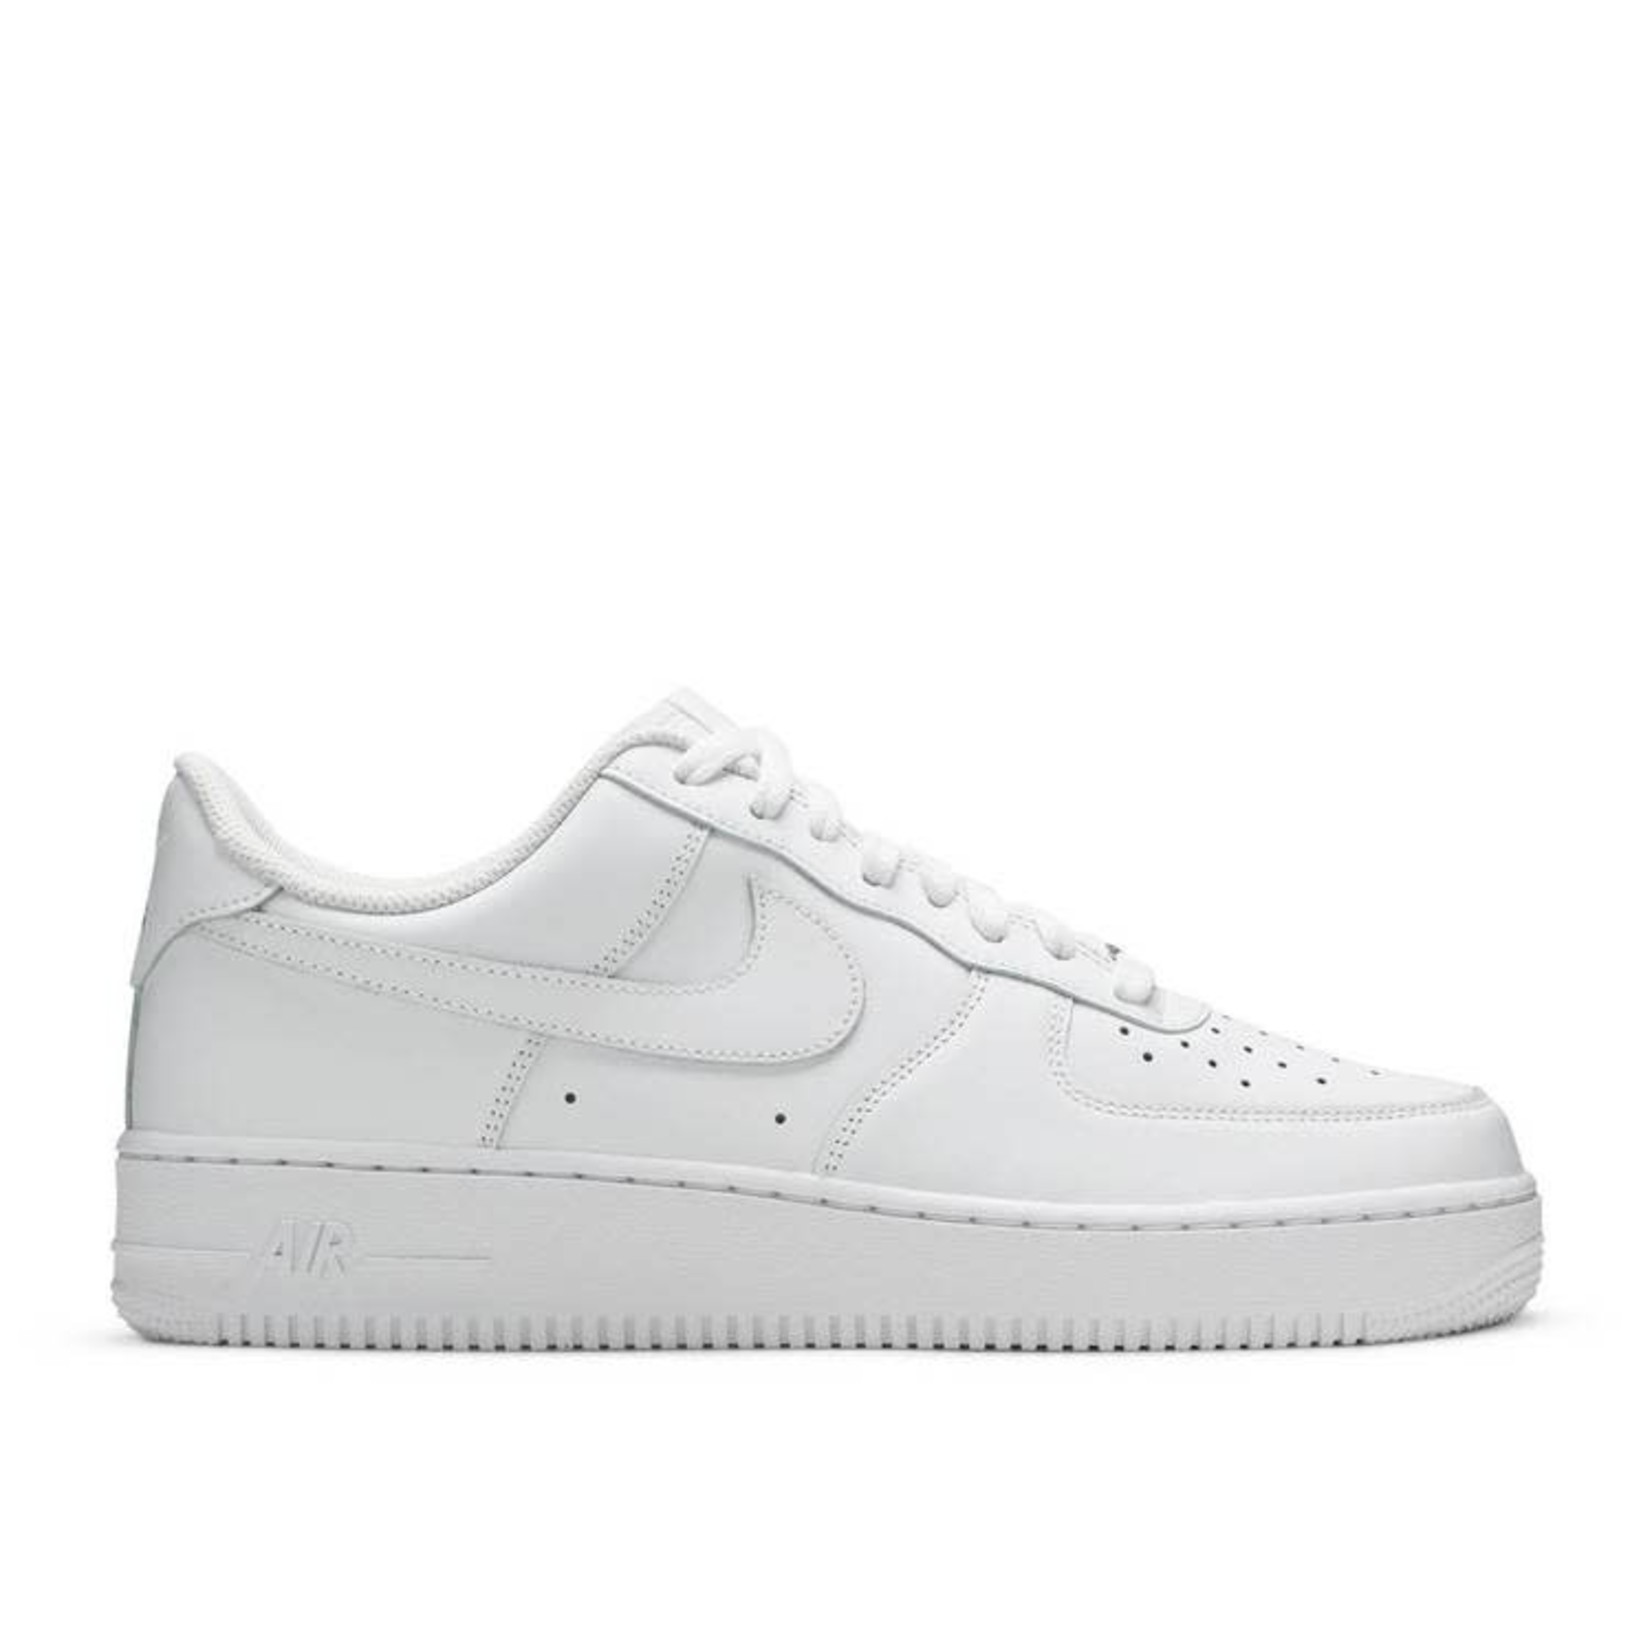 Nike Nike Air Force 1 Low LE Triple White (GS) Size 4, DS BRAND NEW